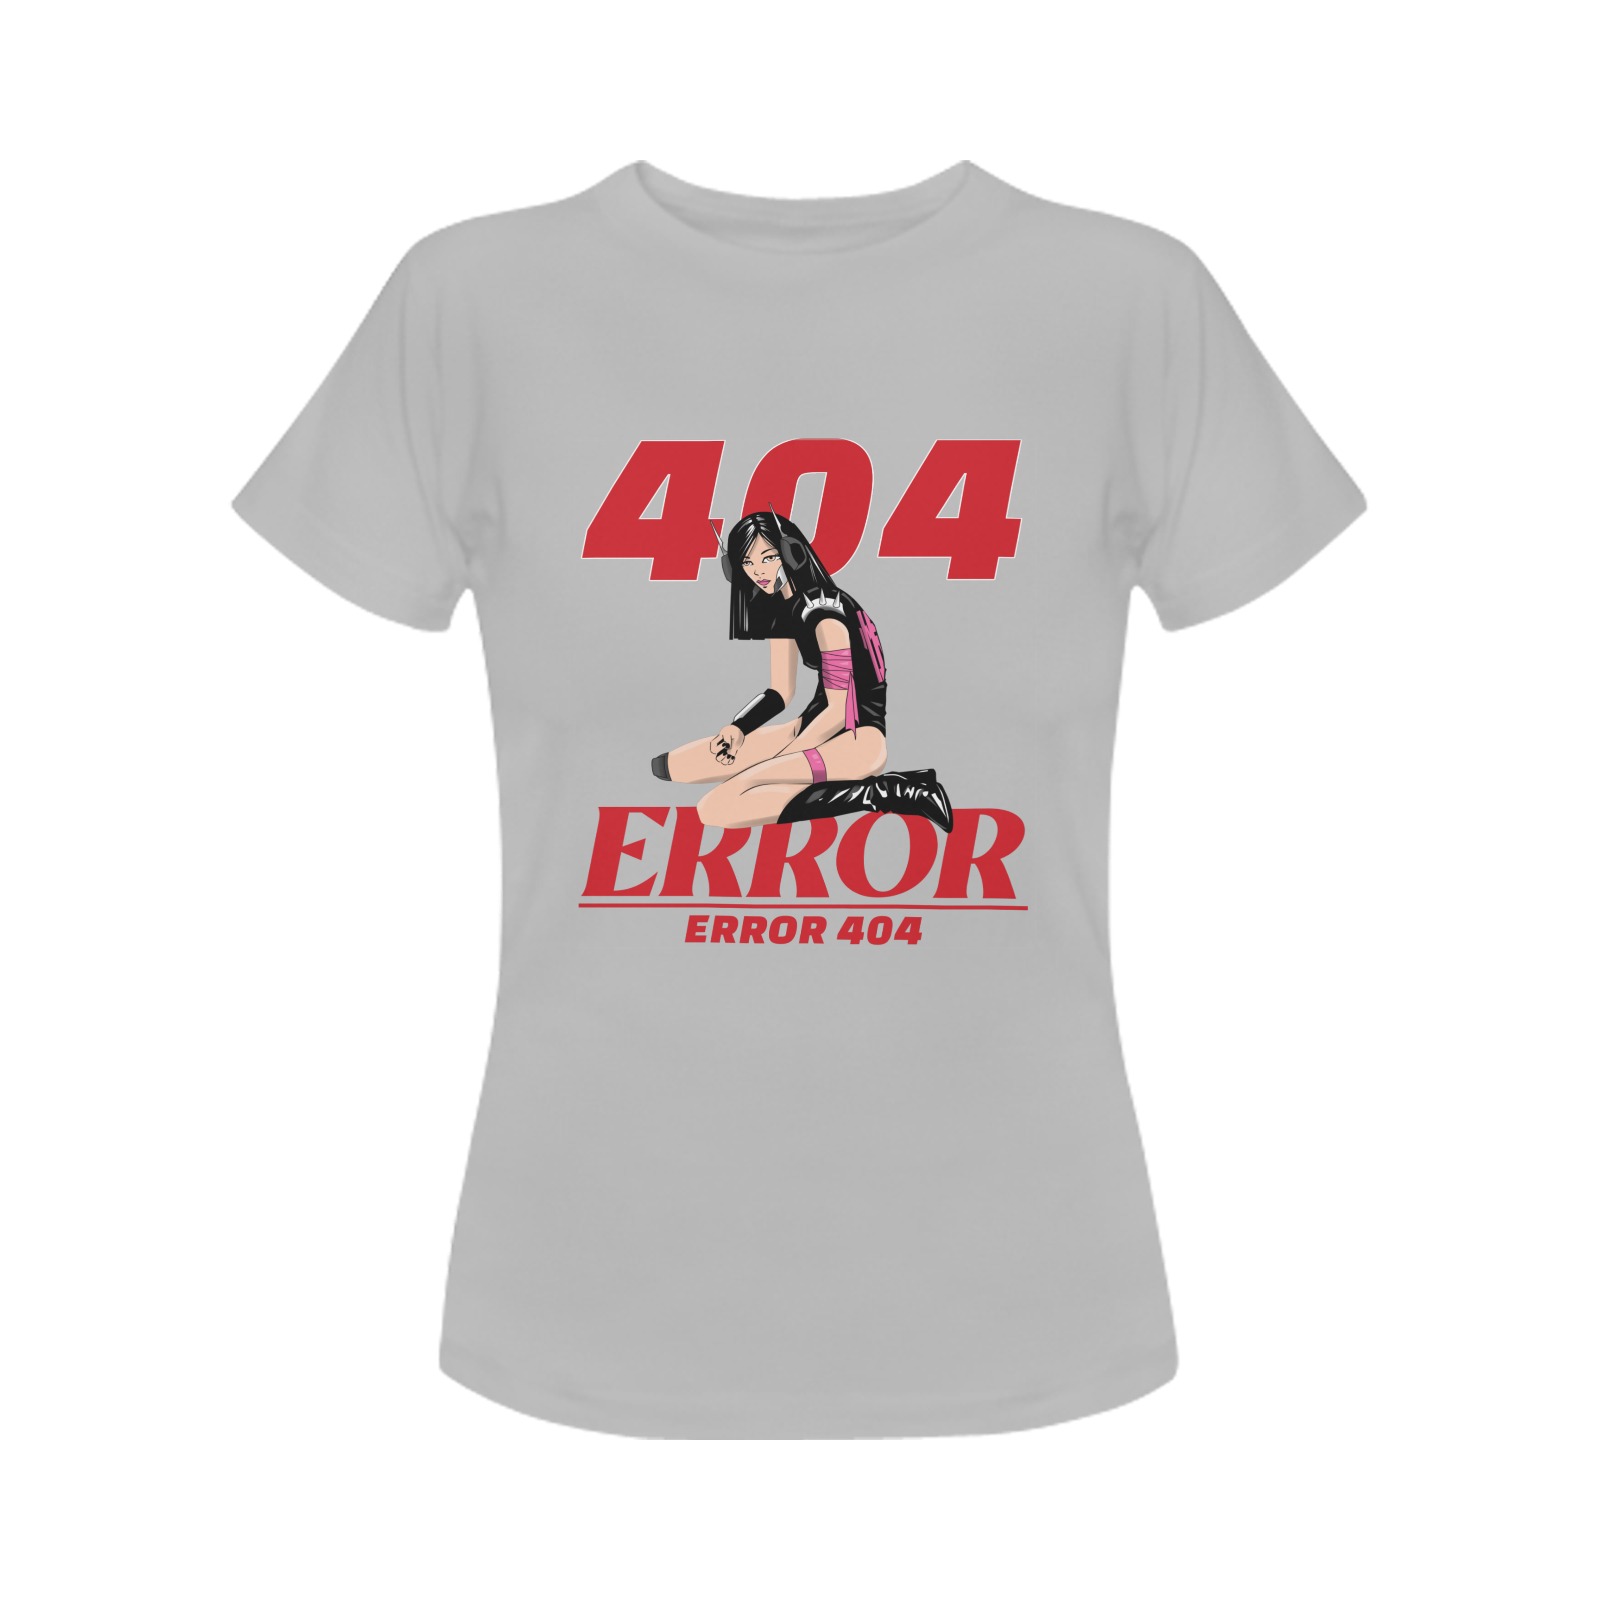 Error 404 modern-t-shirt-design-template-featuring-a-female-warrior-character-graphic-3650i Women's T-Shirt in USA Size (Two Sides Printing)